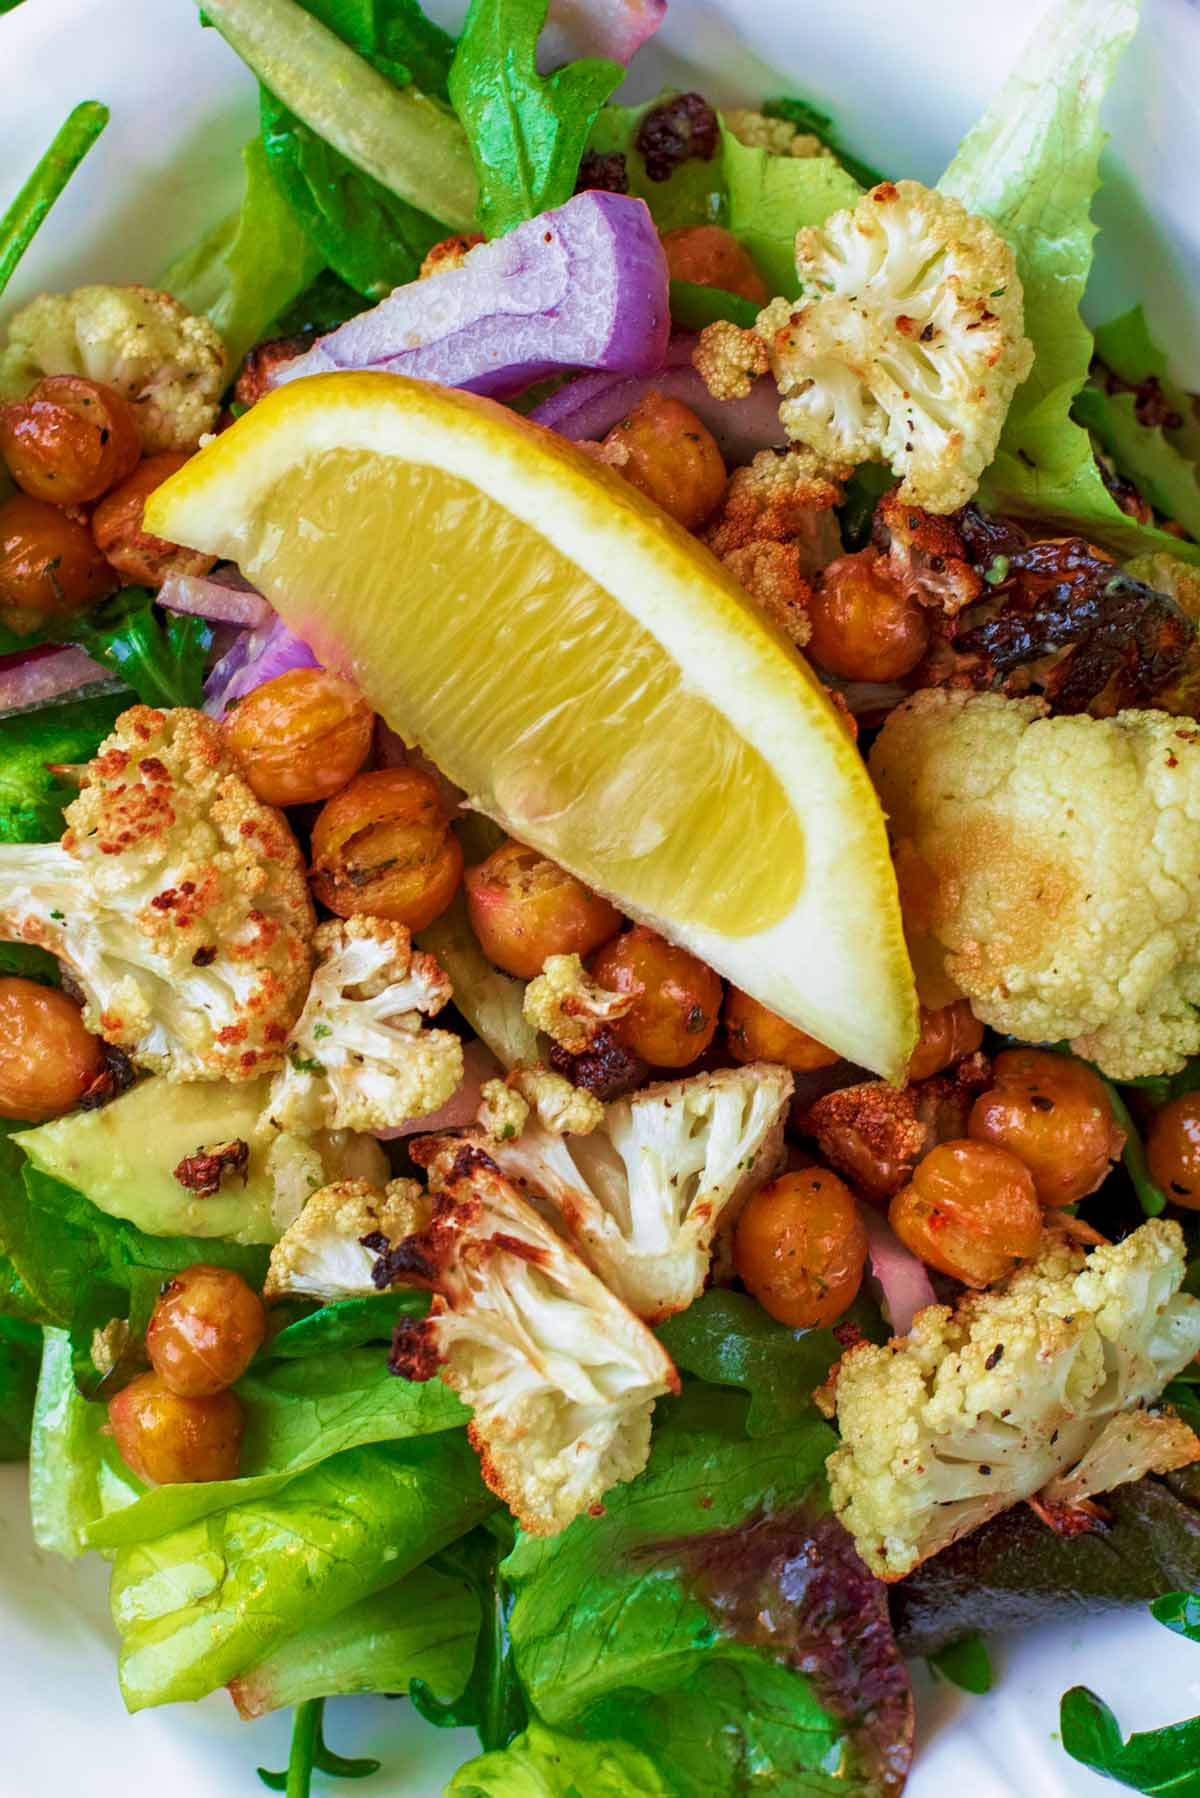 A lemon wedge sat on top of roasted cauliflower and chickpeas.